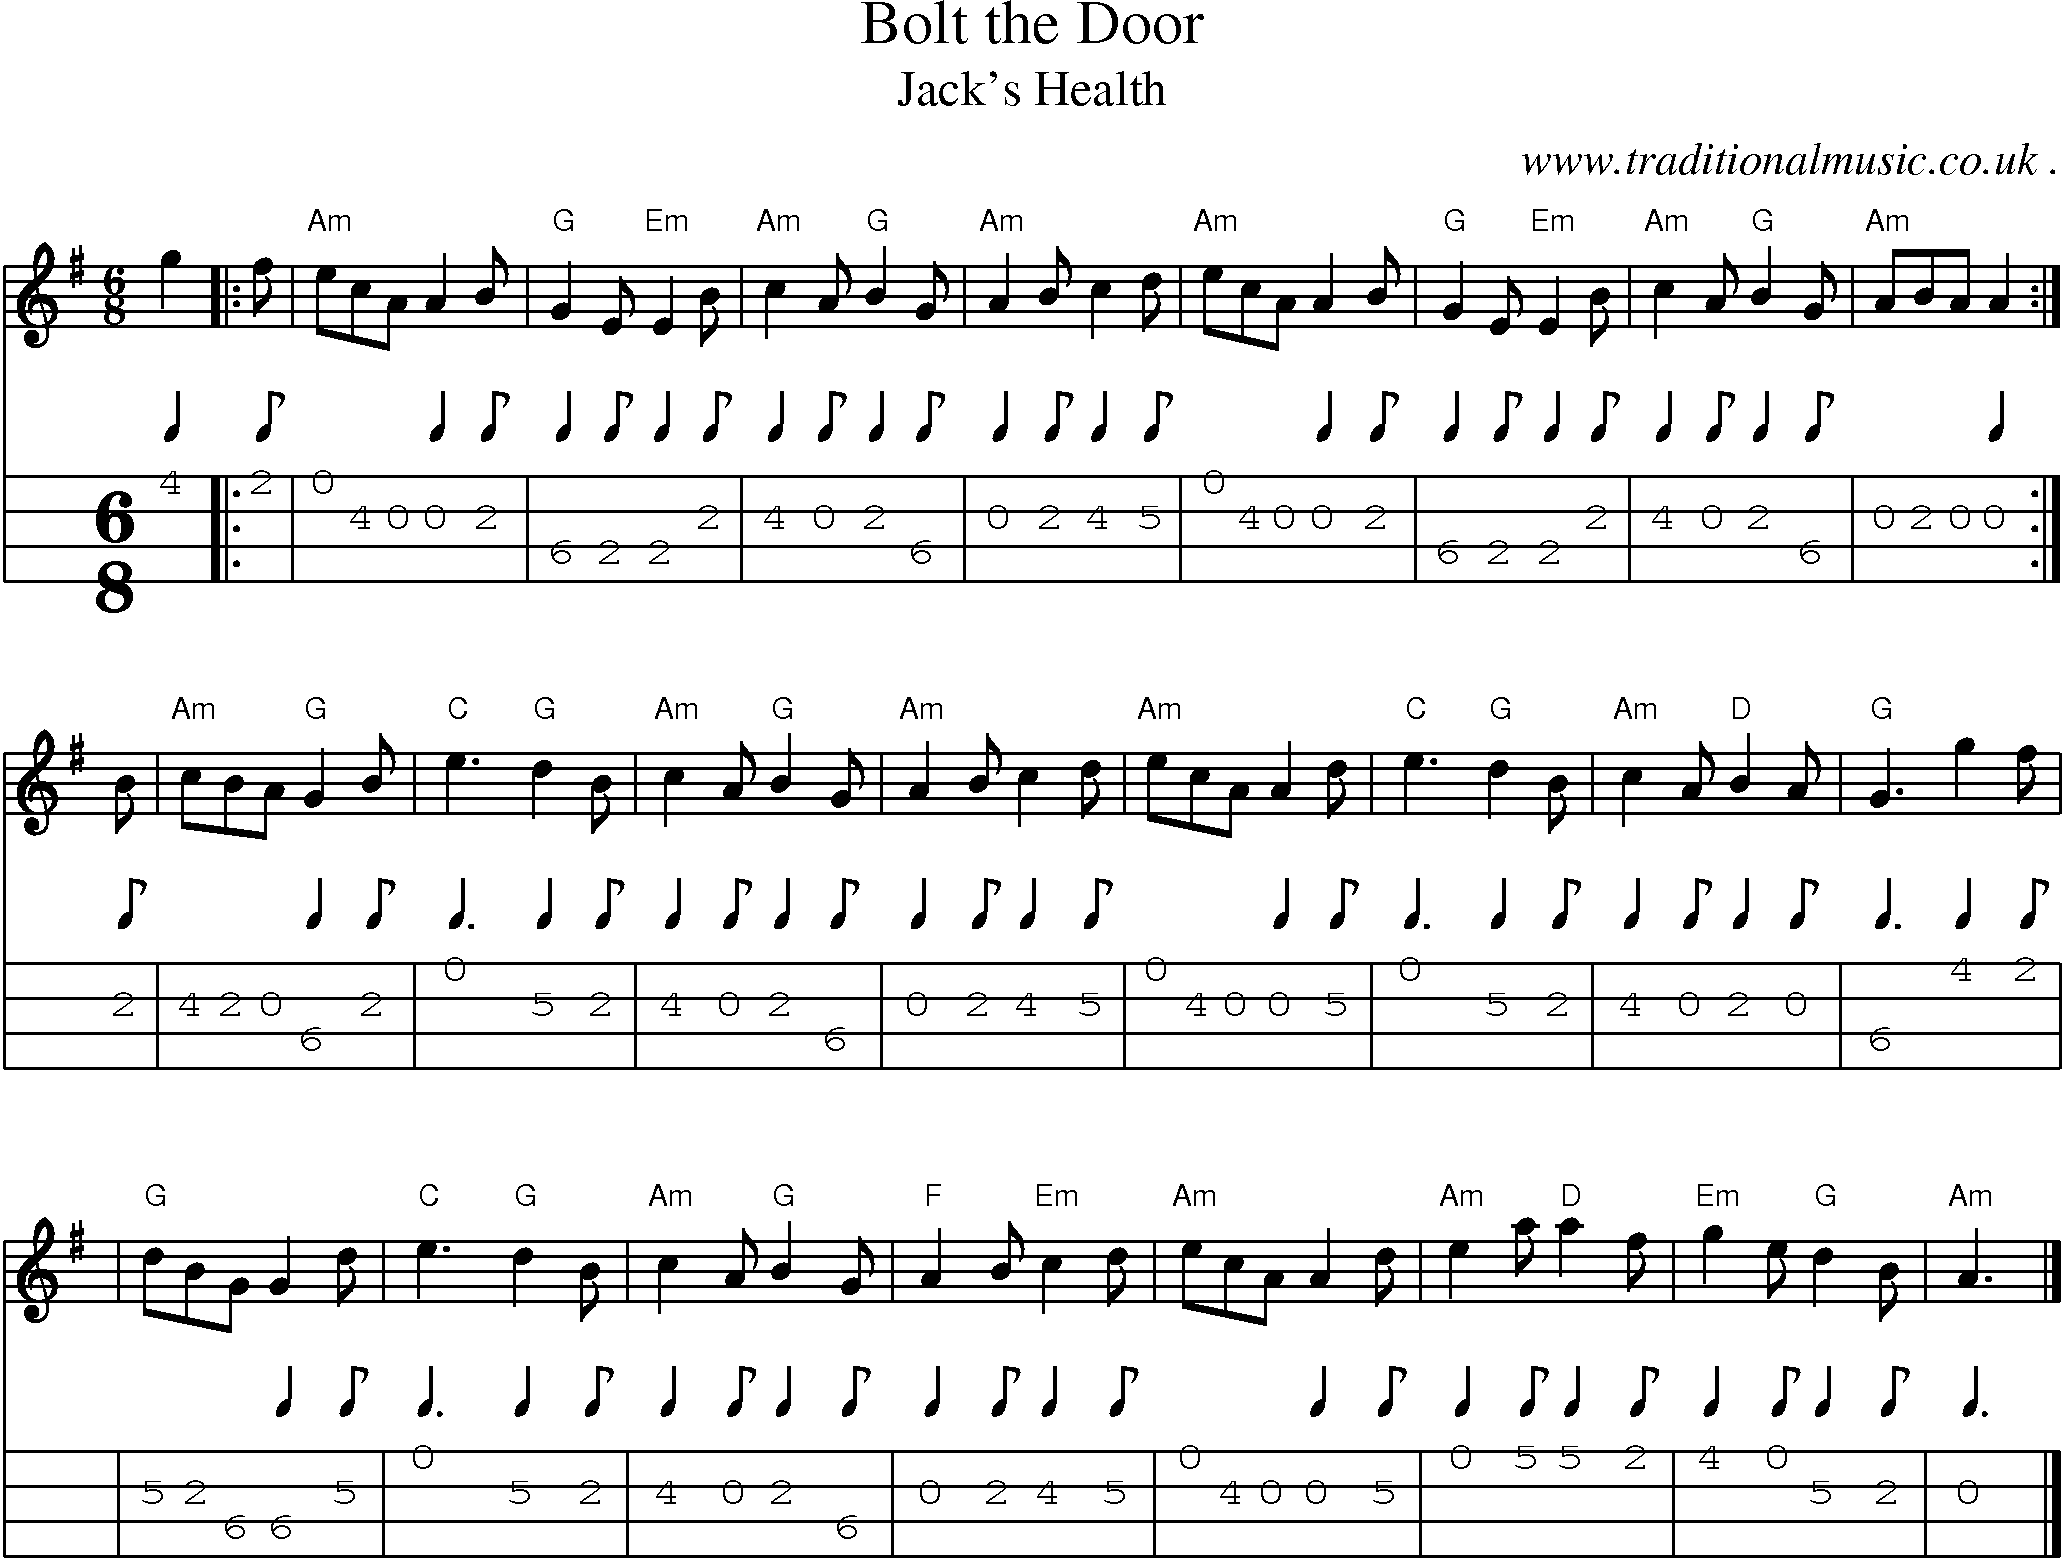 Sheet-music  score, Chords and Mandolin Tabs for Bolt The Door